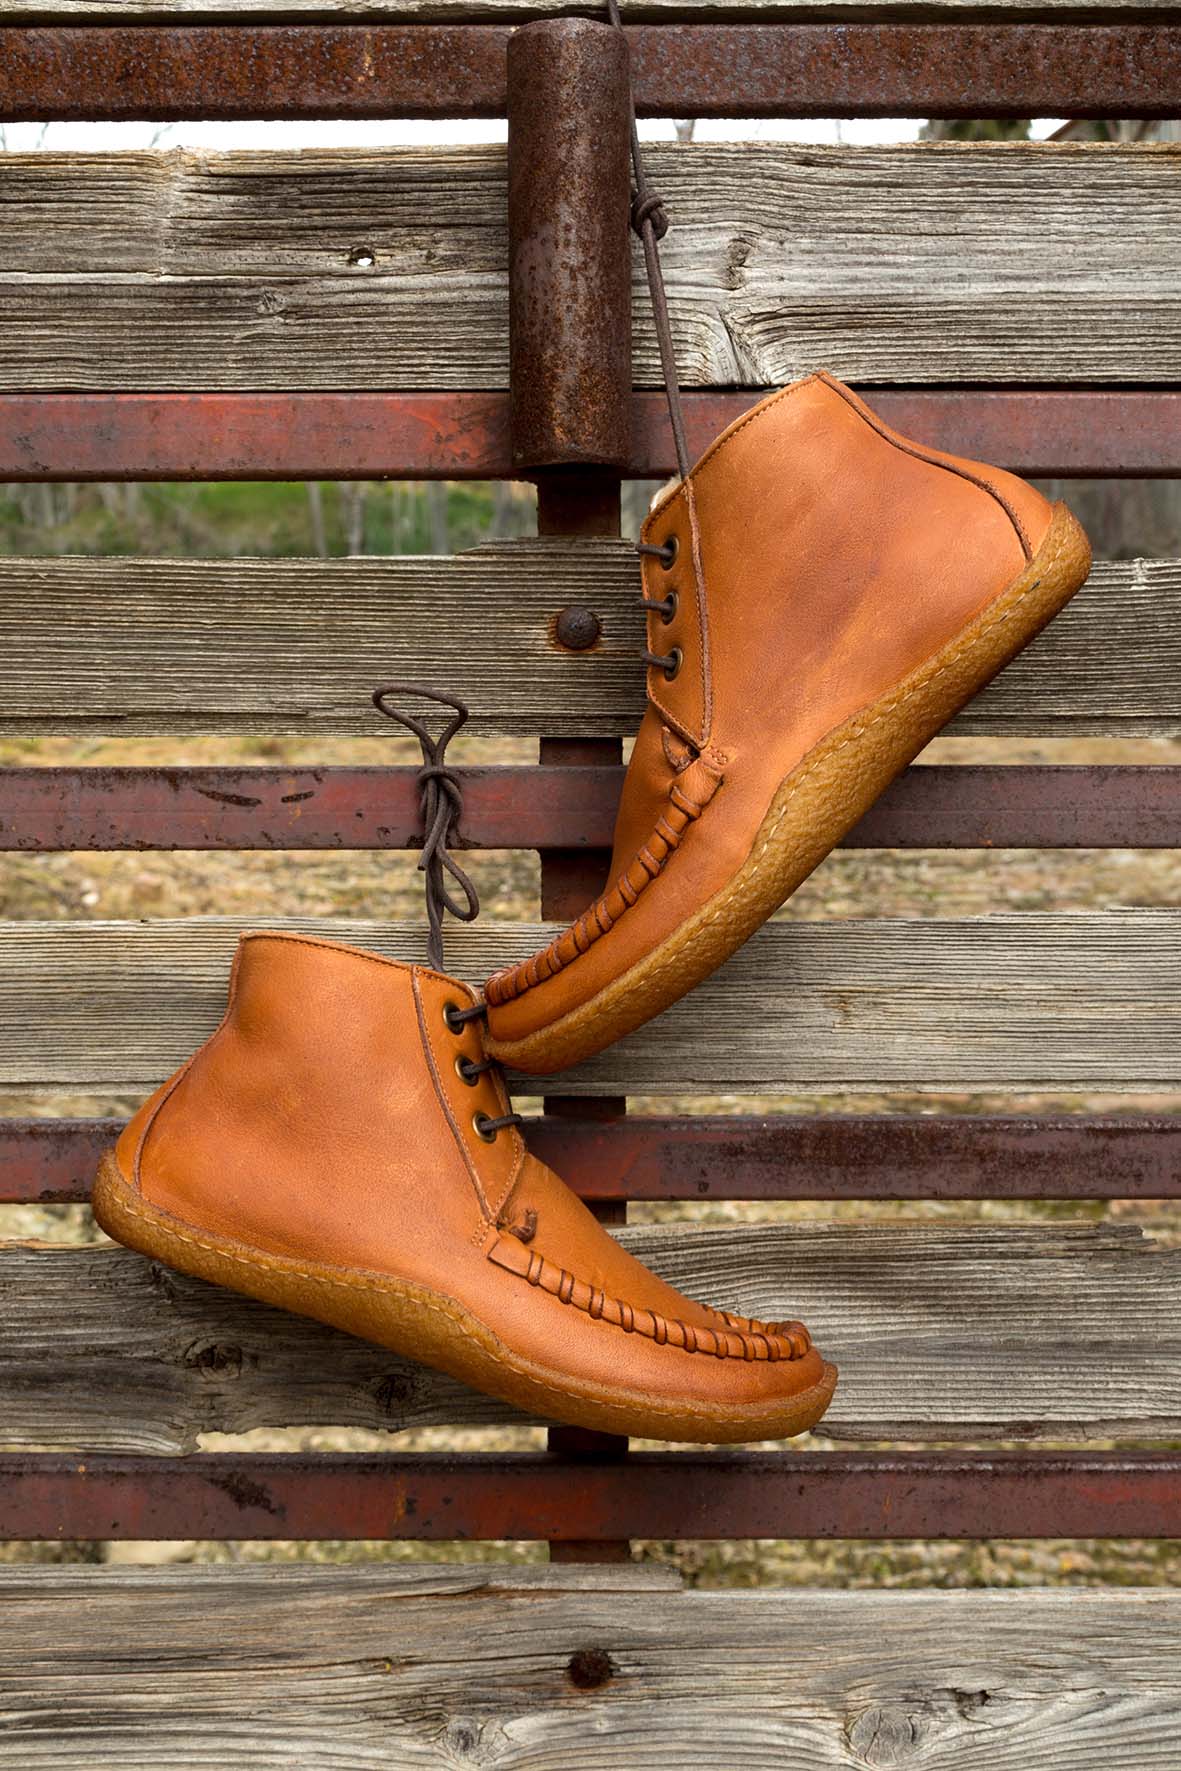 HRN 03 – Tan ankle boots